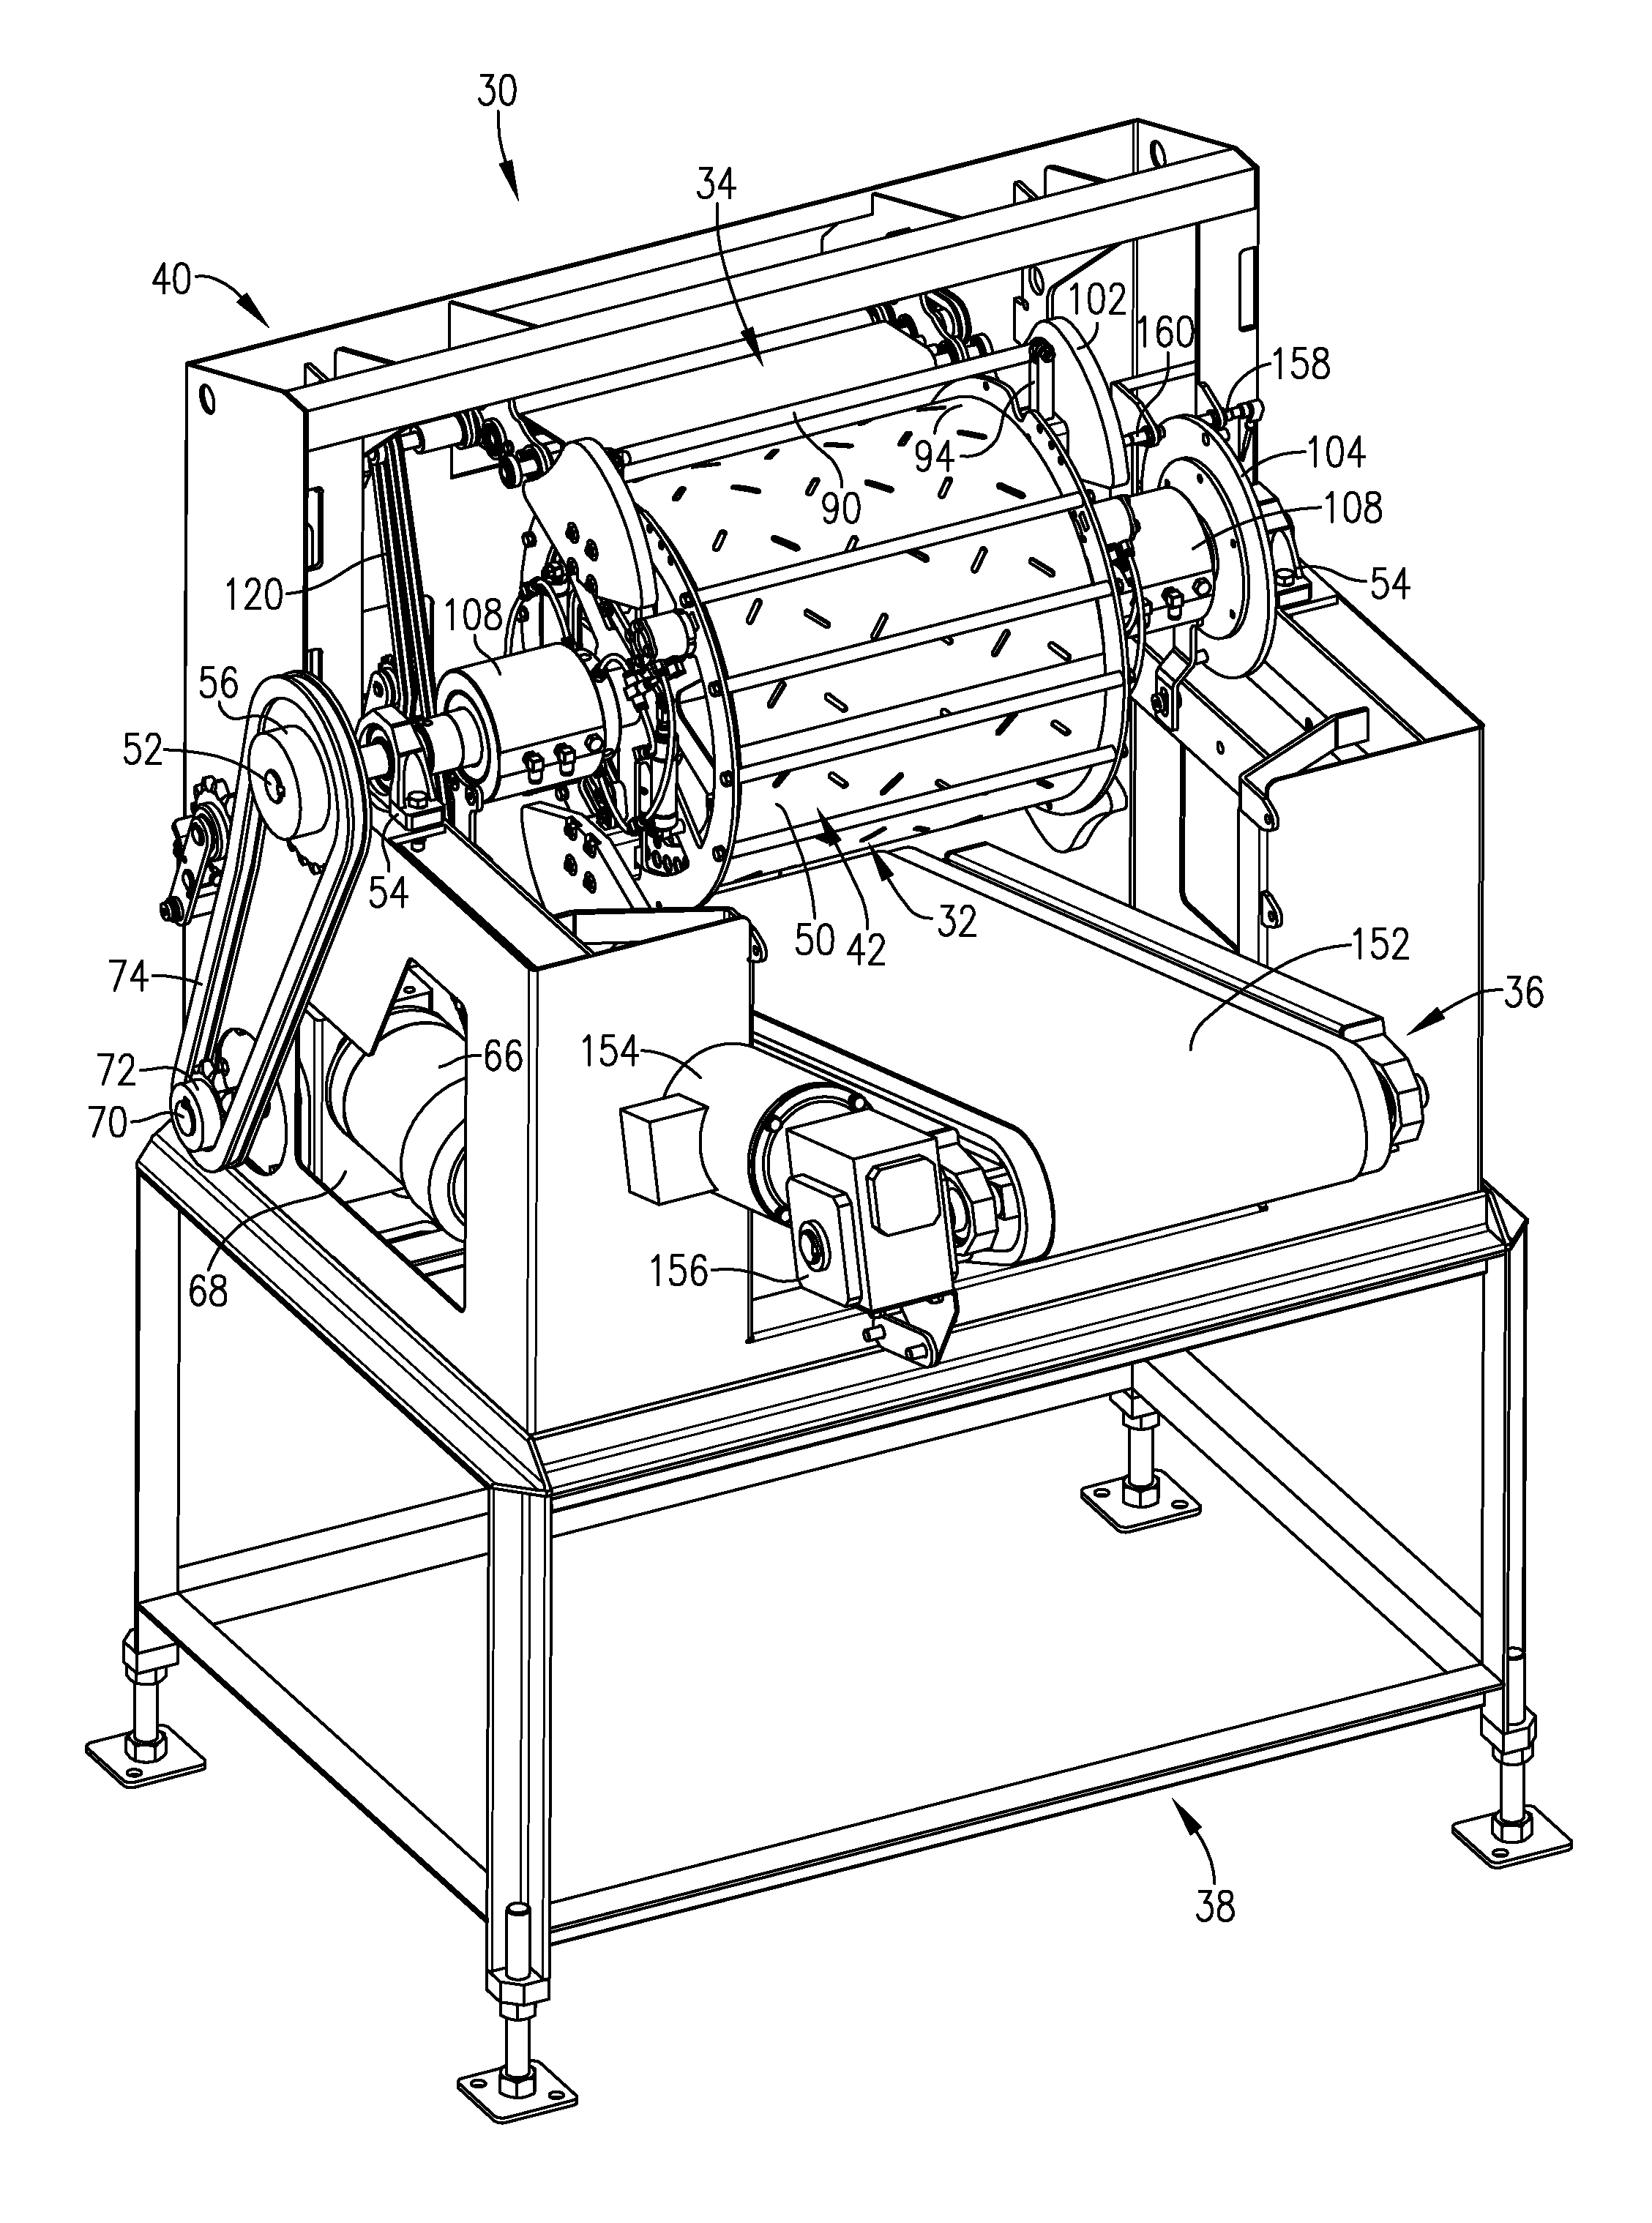 Apparatus and method for processing of pork bellies